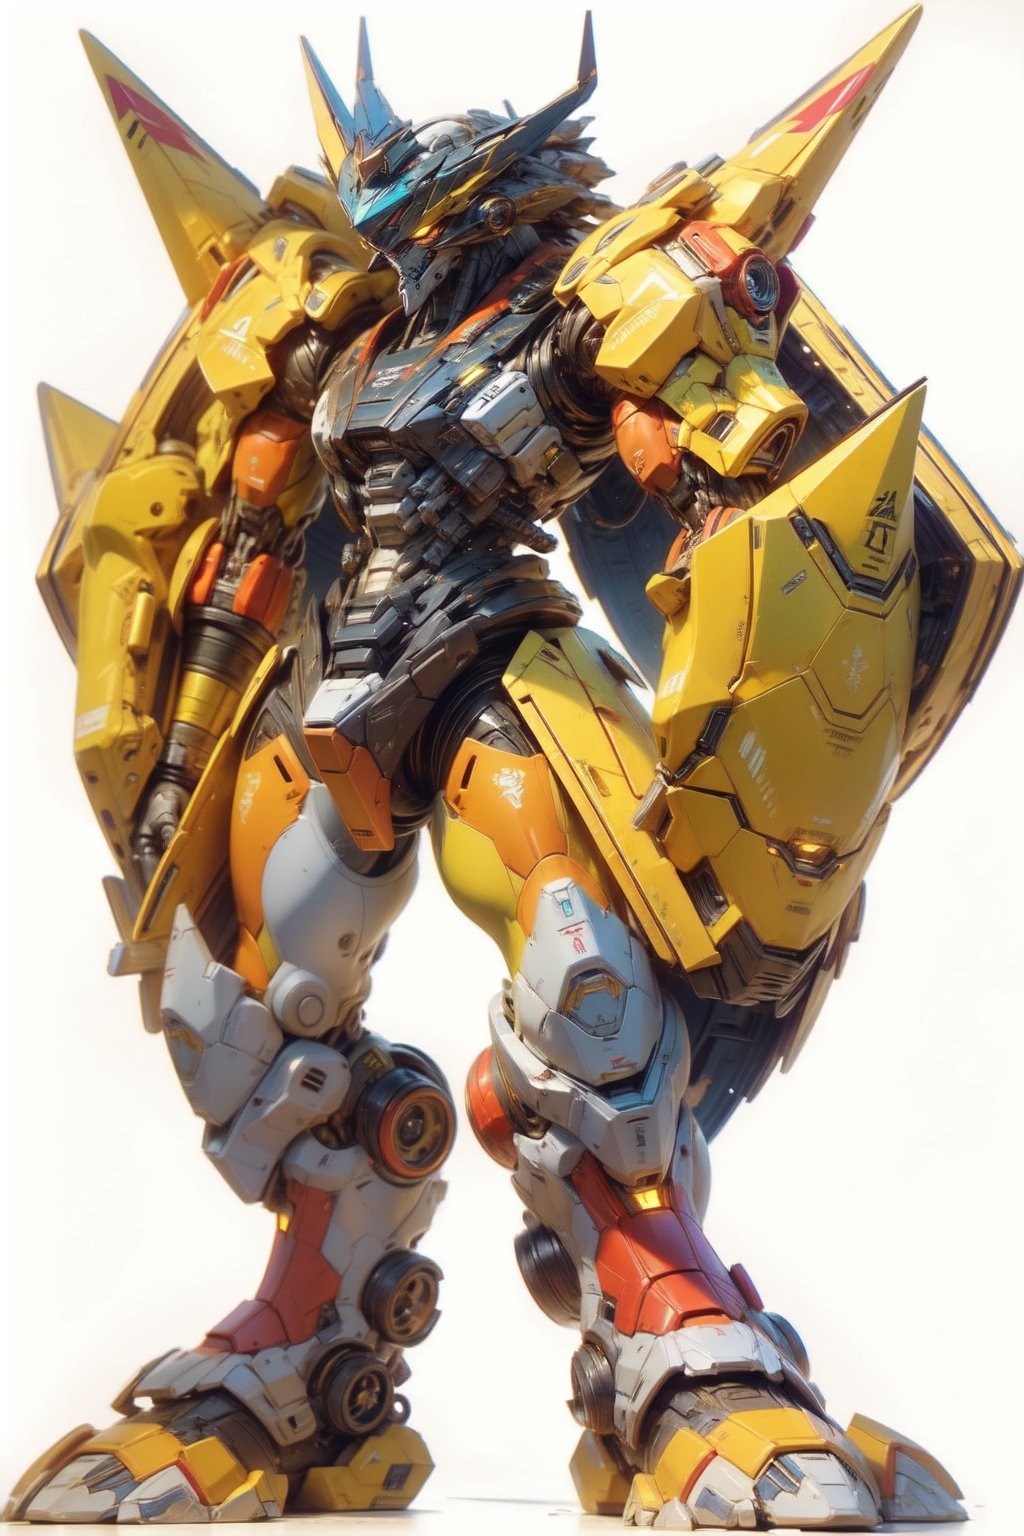 Create a vivid and dynamic illustration of Wargreymon, the iconic Digimon, in a cyberpunk-inspired setting. Emphasize Wargreymon's powerful and muscular physique, blending elements of both muscle and machinery. Picture Wargreymon with fur accents, seamlessly integrating into a futuristic, neon-lit cityscape. Capture the essence of the cybernetic enhancements while maintaining the character's distinct Digimon features. Feel free to experiment with unique poses, lighting effects, and details that enhance the fusion of muscle, fur, and cyberpunk aesthetics. Your goal is to convey Wargreymon's strength and resilience in this cutting-edge, dystopian environment.